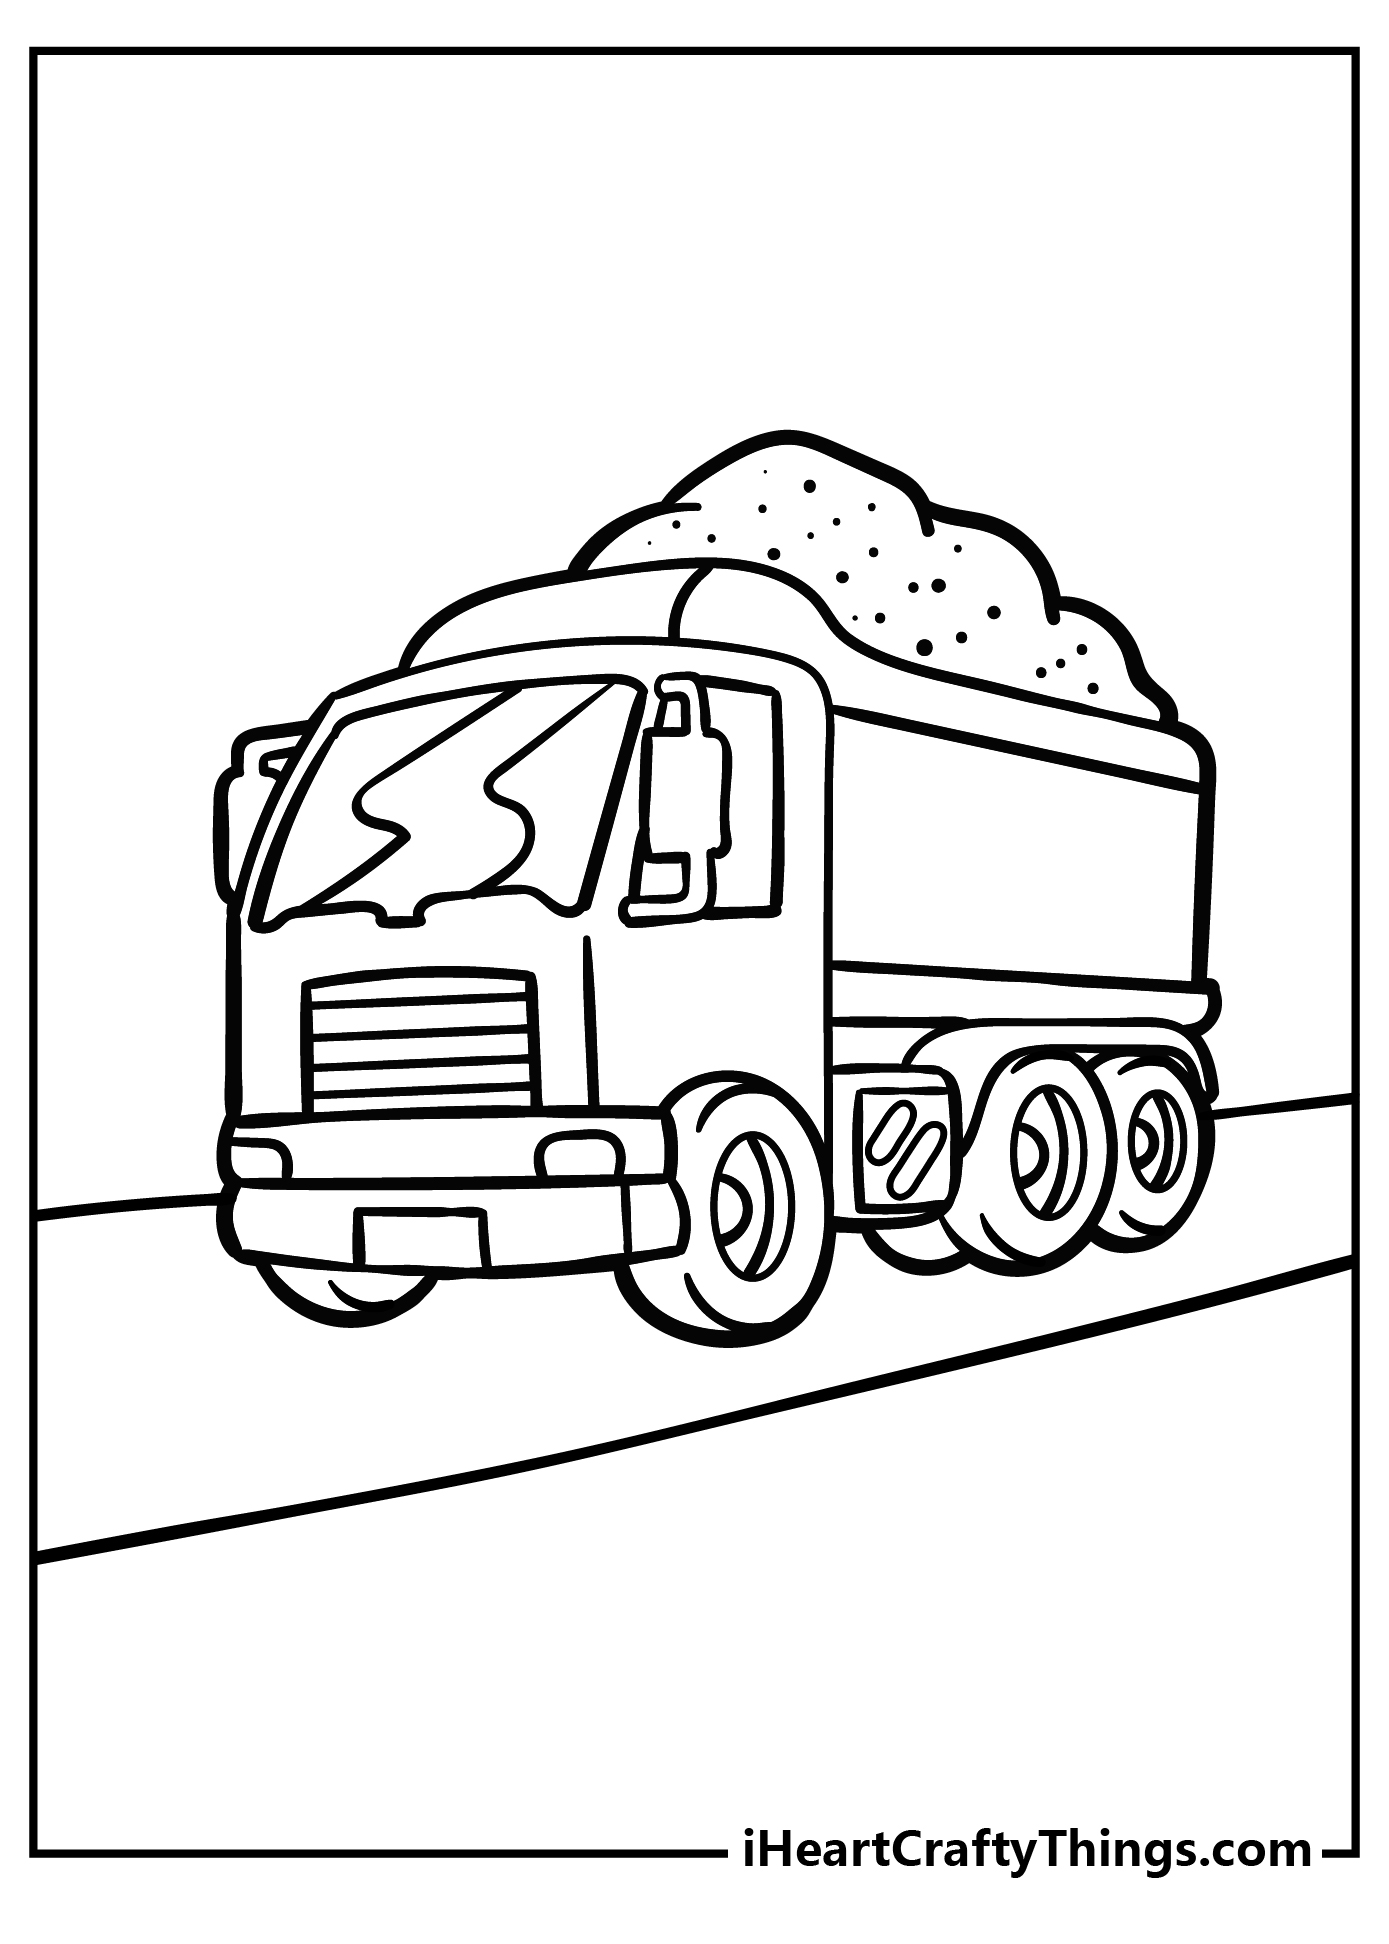 Dump truck coloring pages free printables